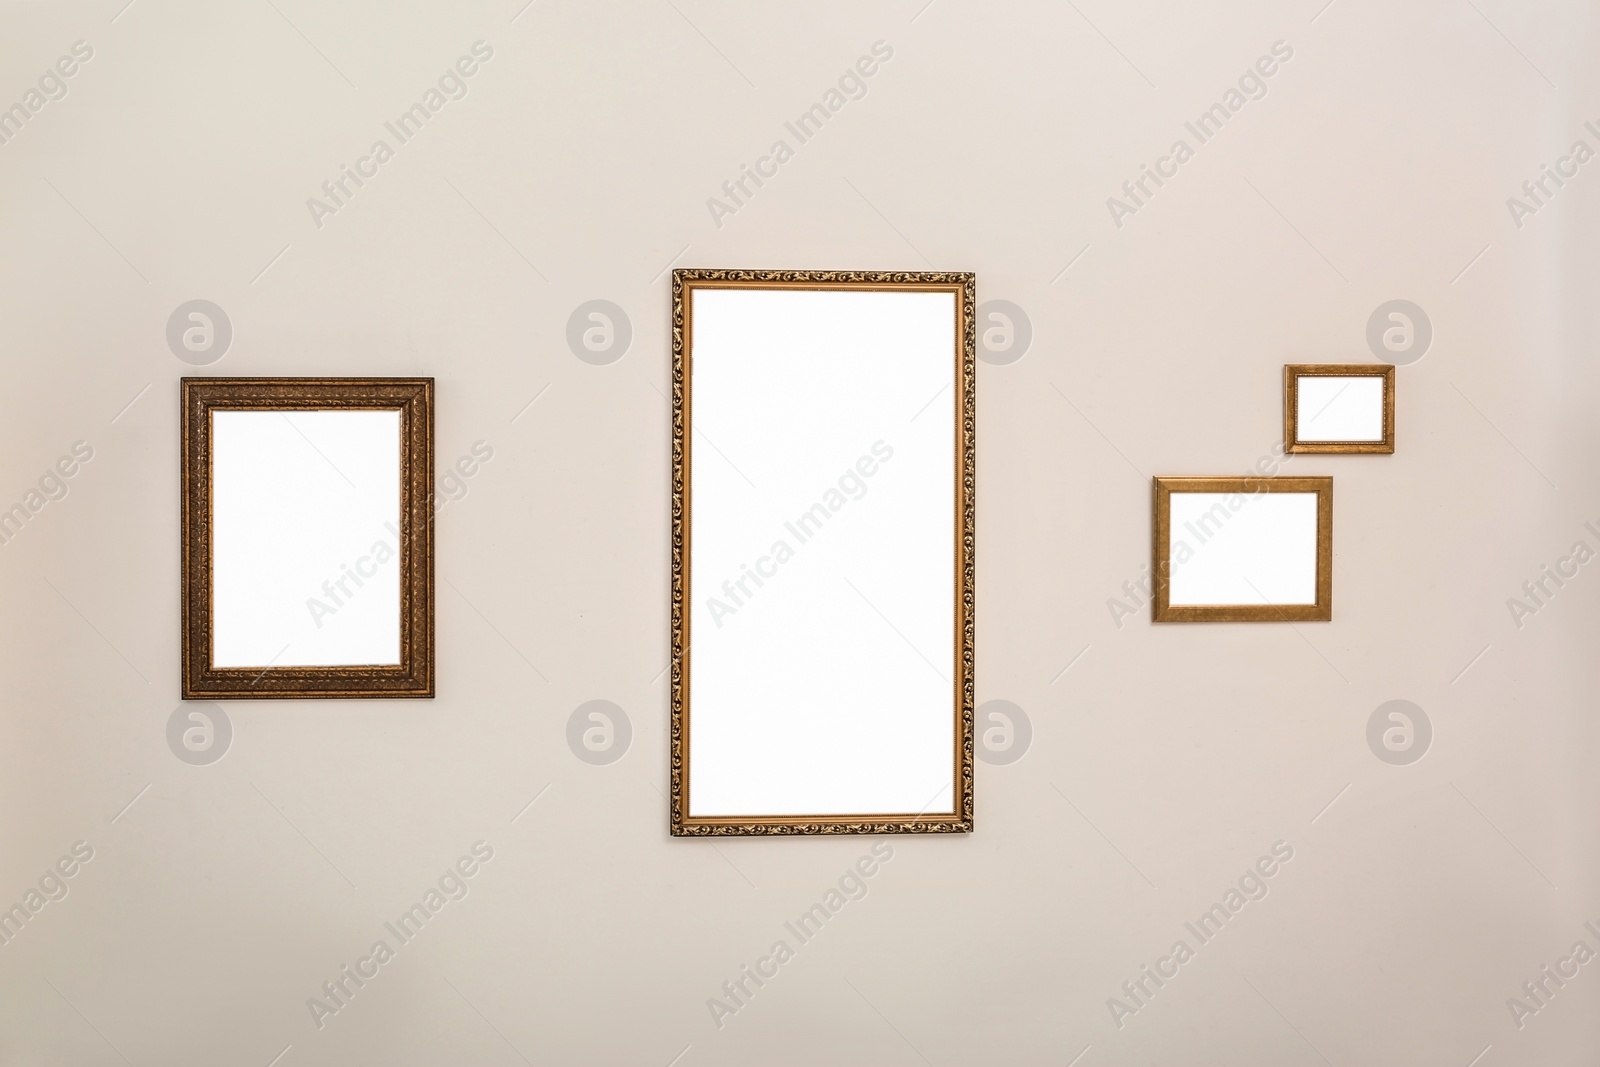 Photo of Frames with empty canvases on wall in modern art gallery. Mockup for design